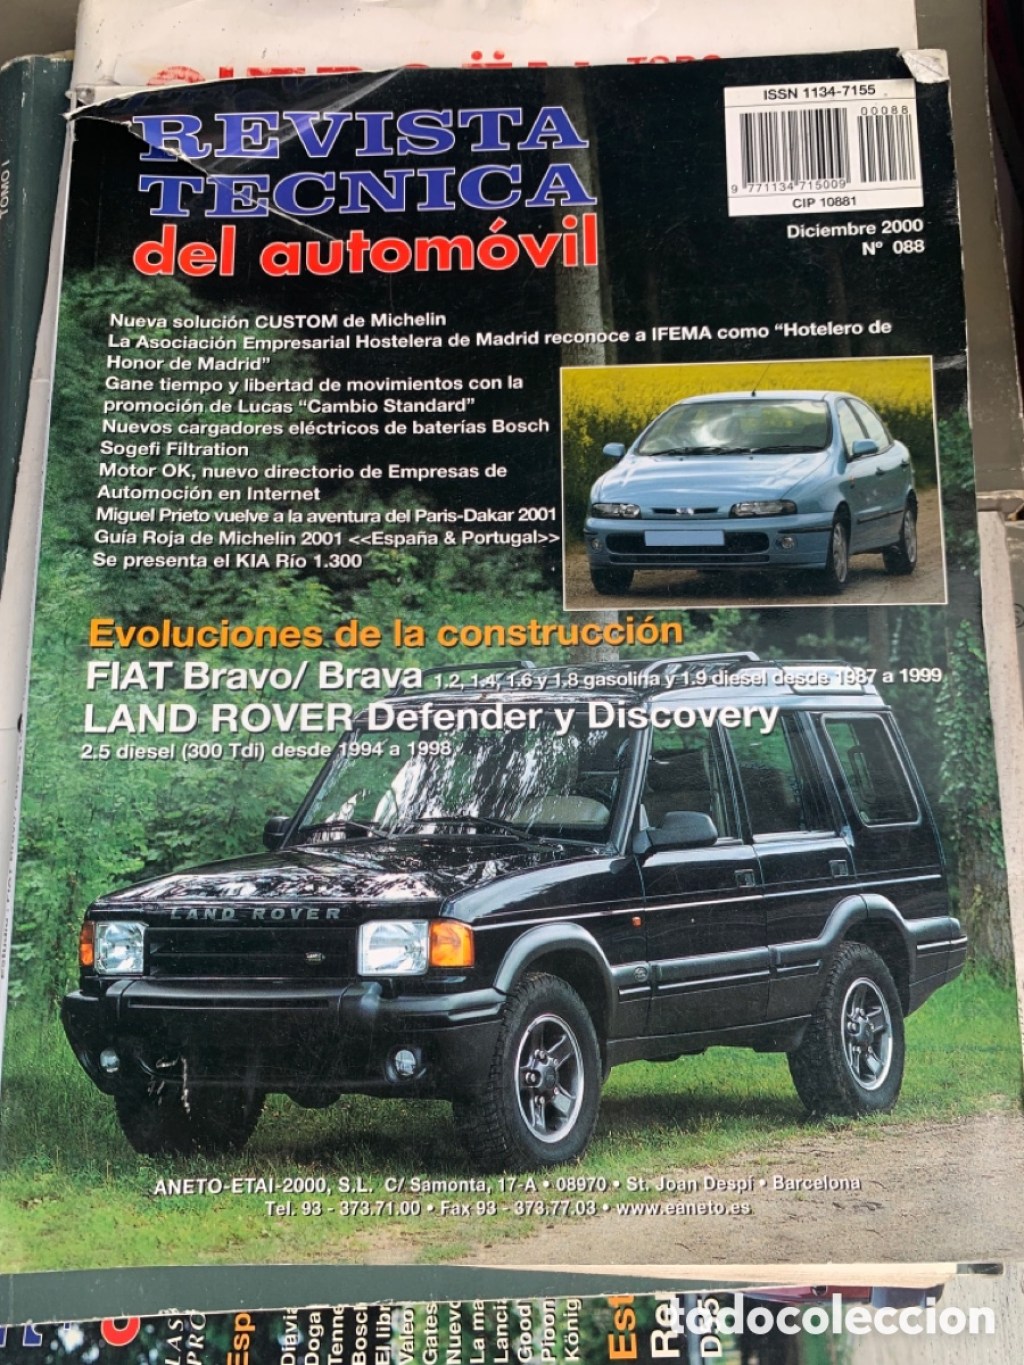 Picture of: MANUAL DE TALLER LAND ROVER DEFENDER Y DISCOVERY , TDI Y GIAT BRAVO